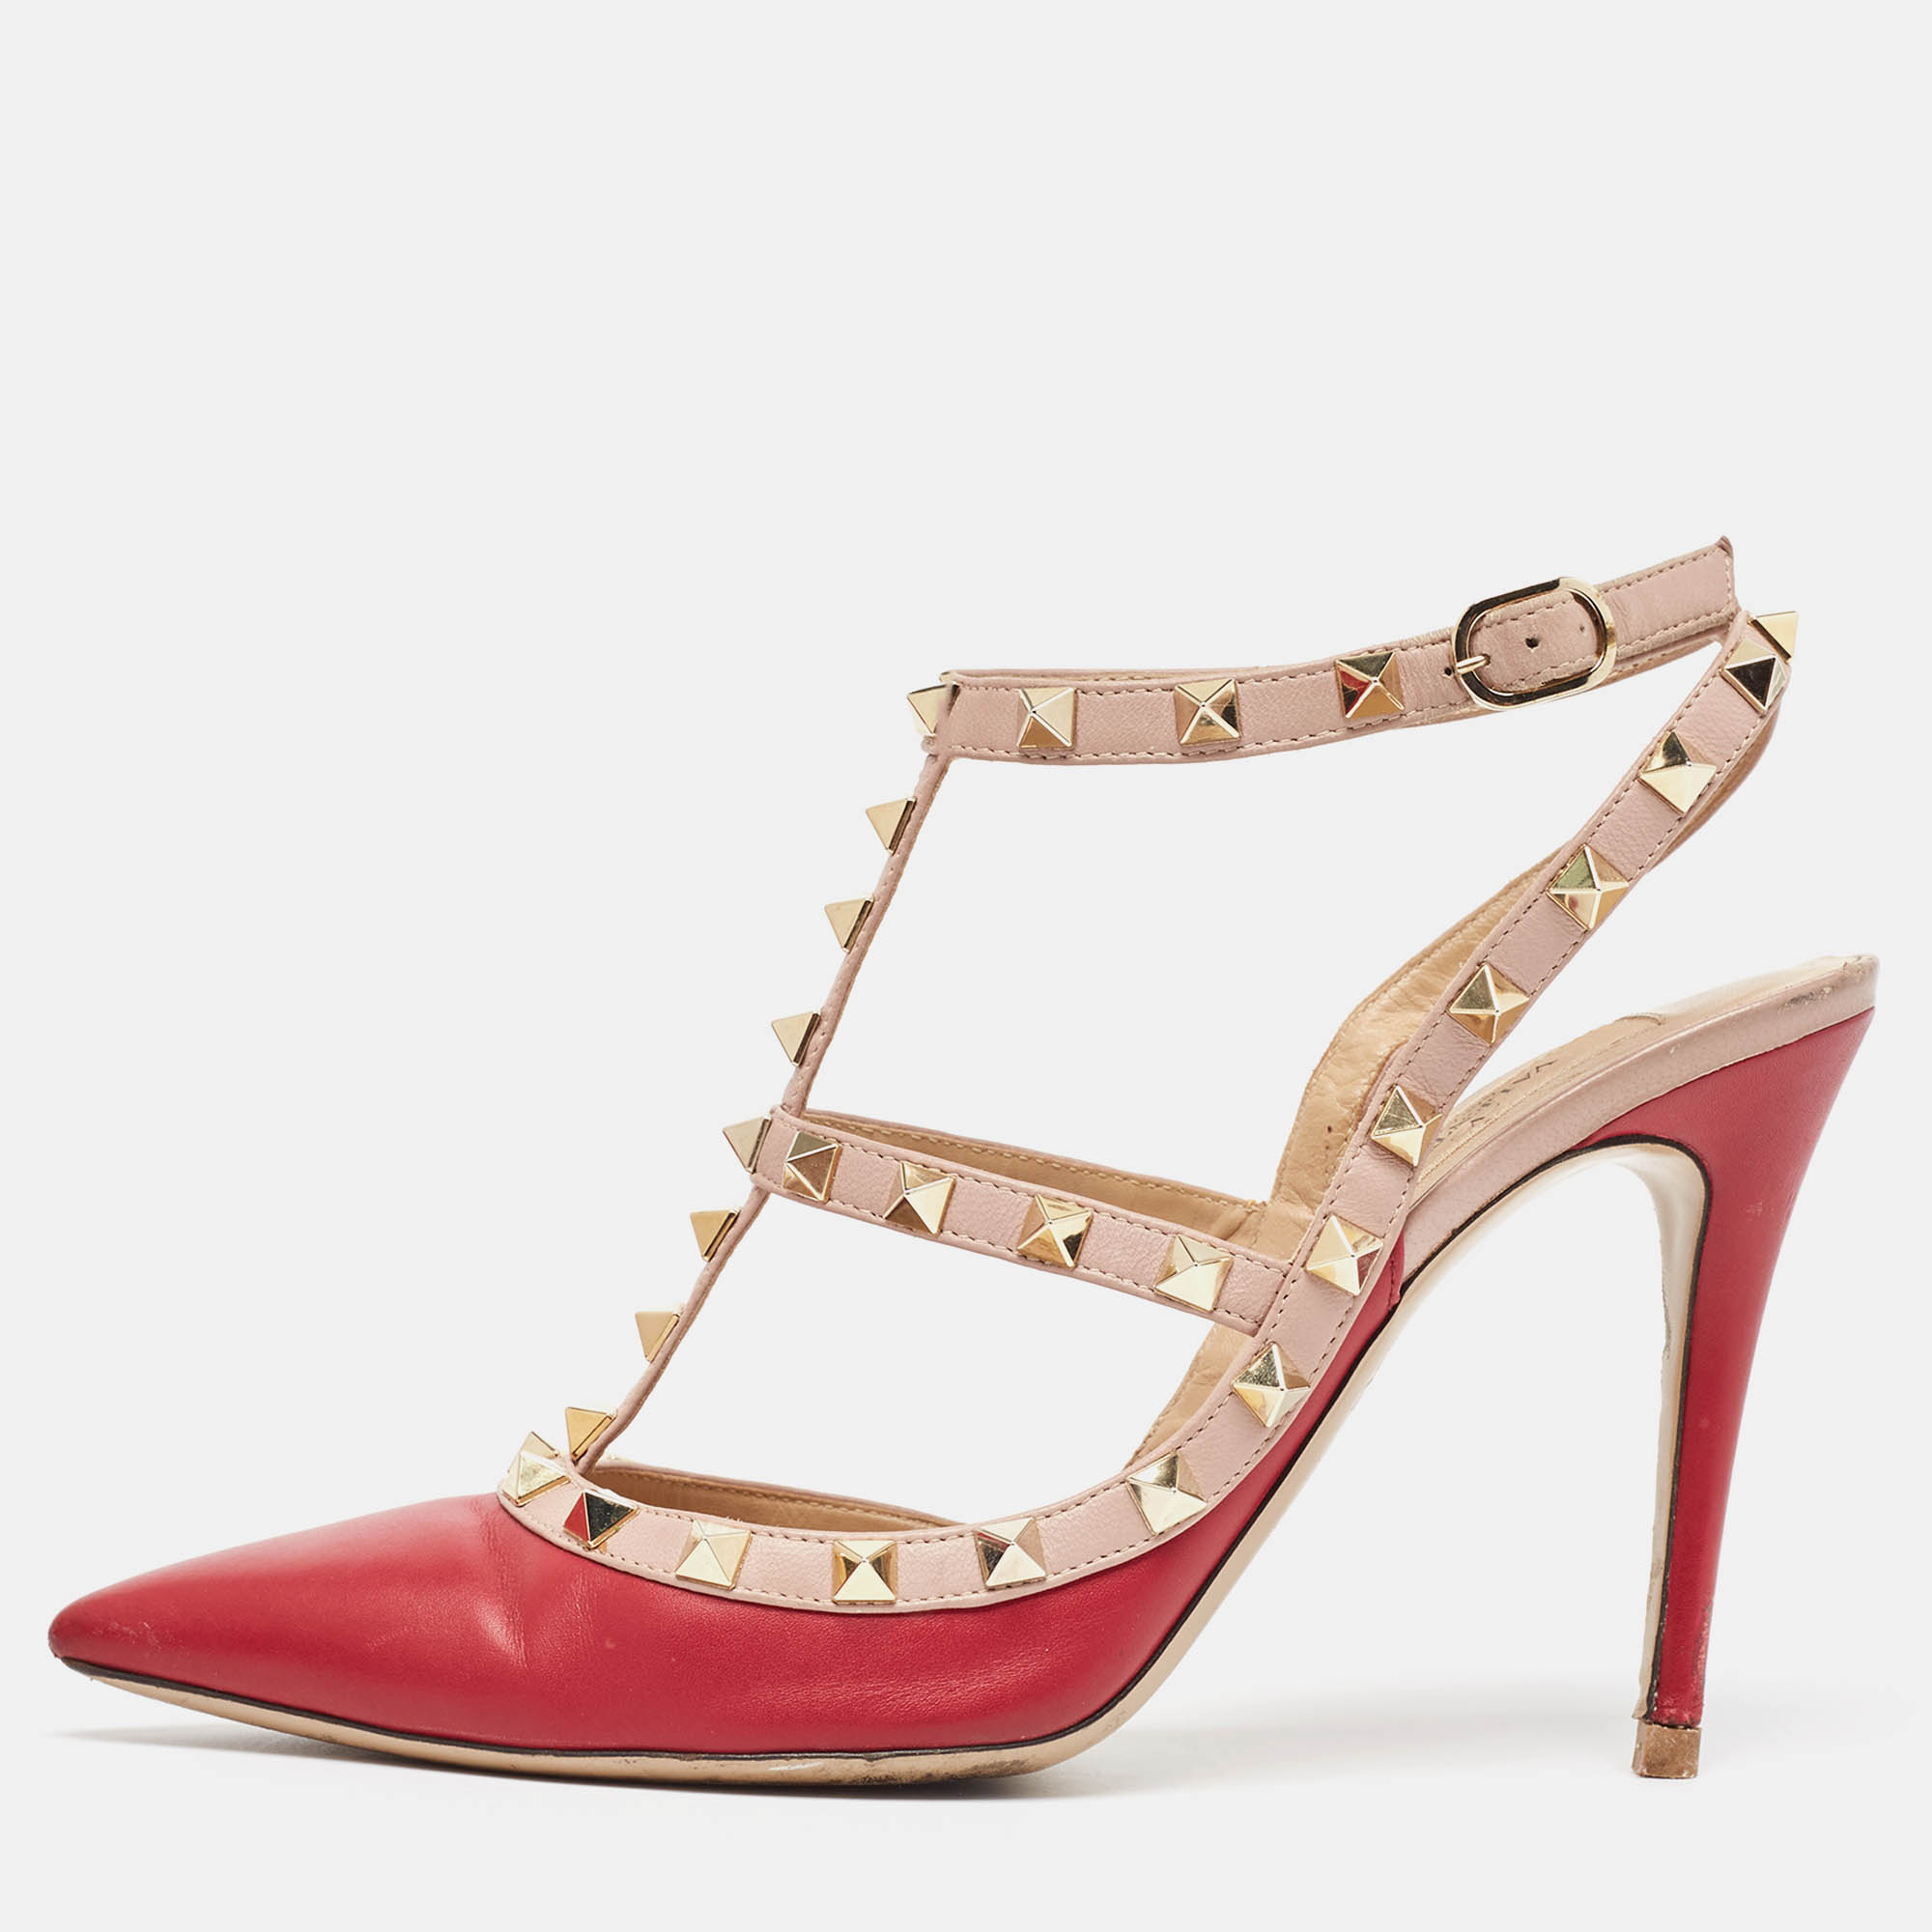 Valentino red/pink leather rockstud ankle strap pumps size 39